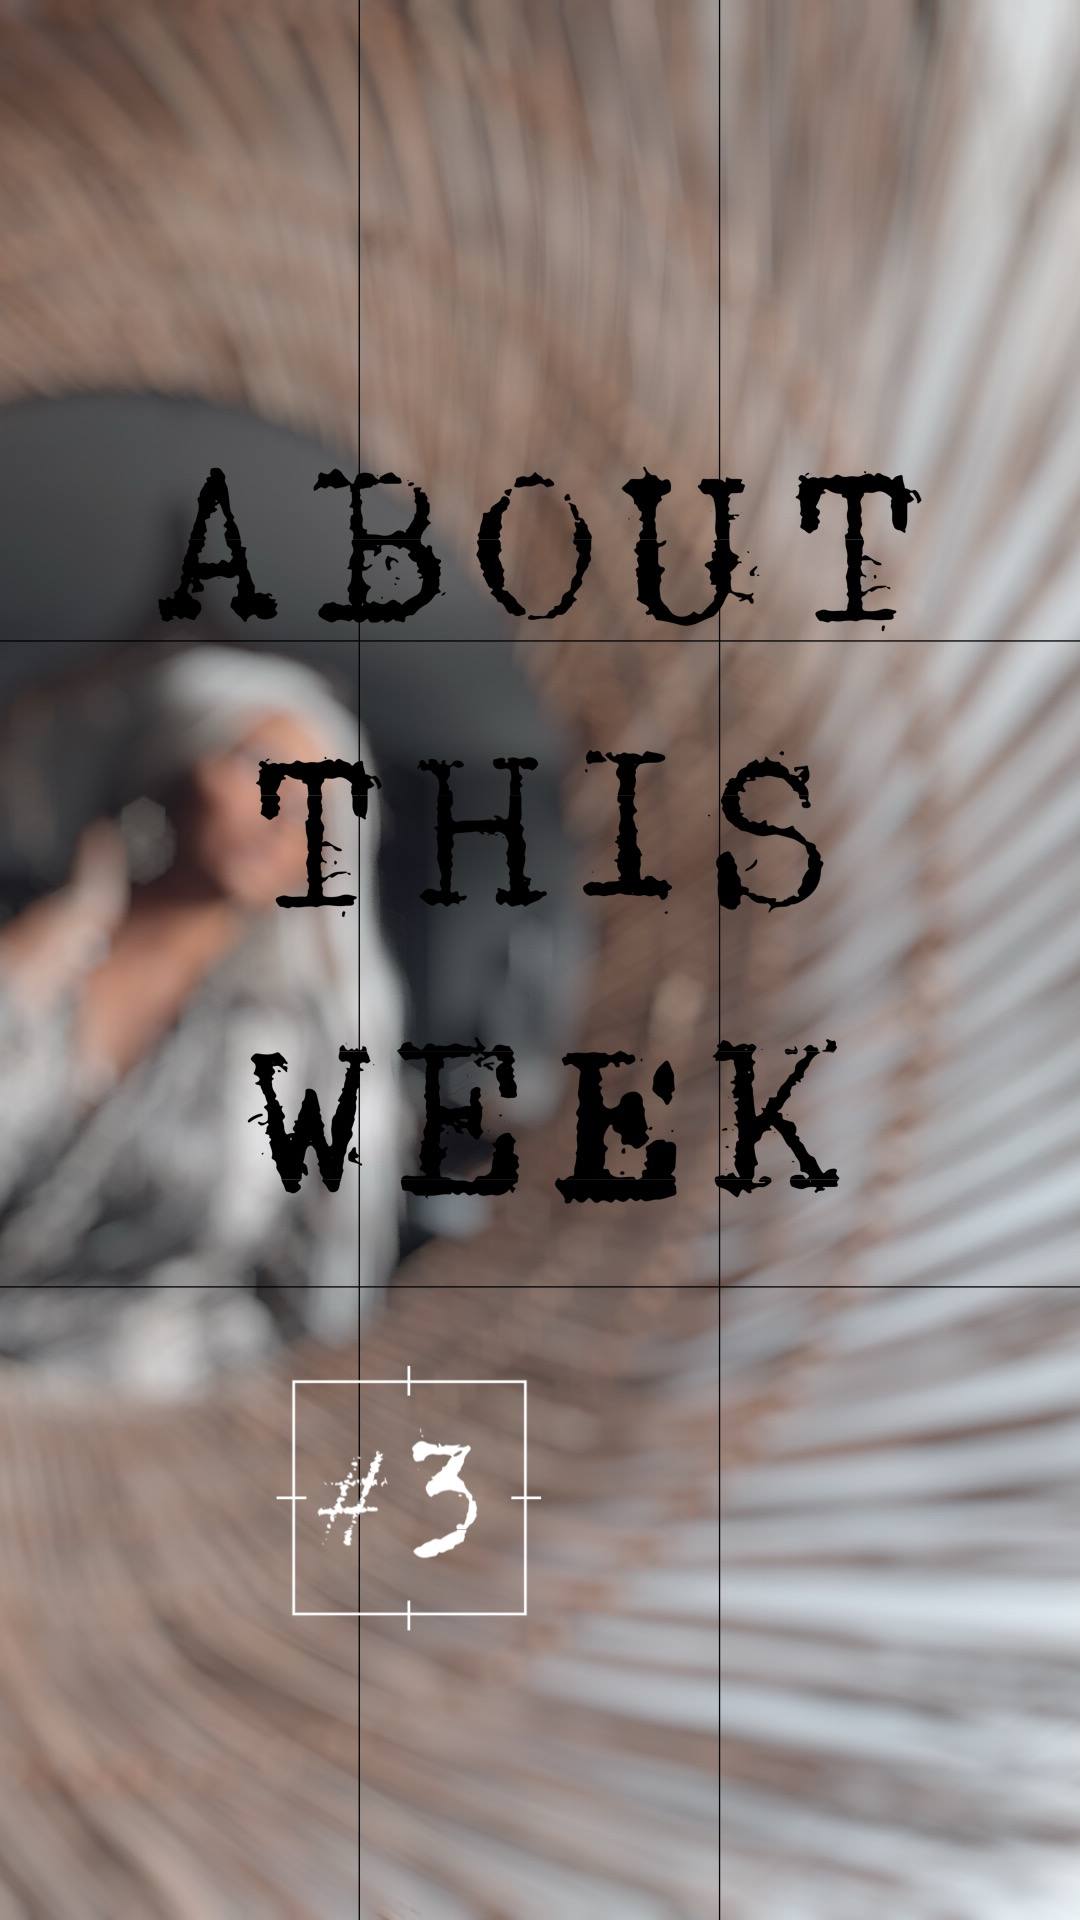 About this week #3